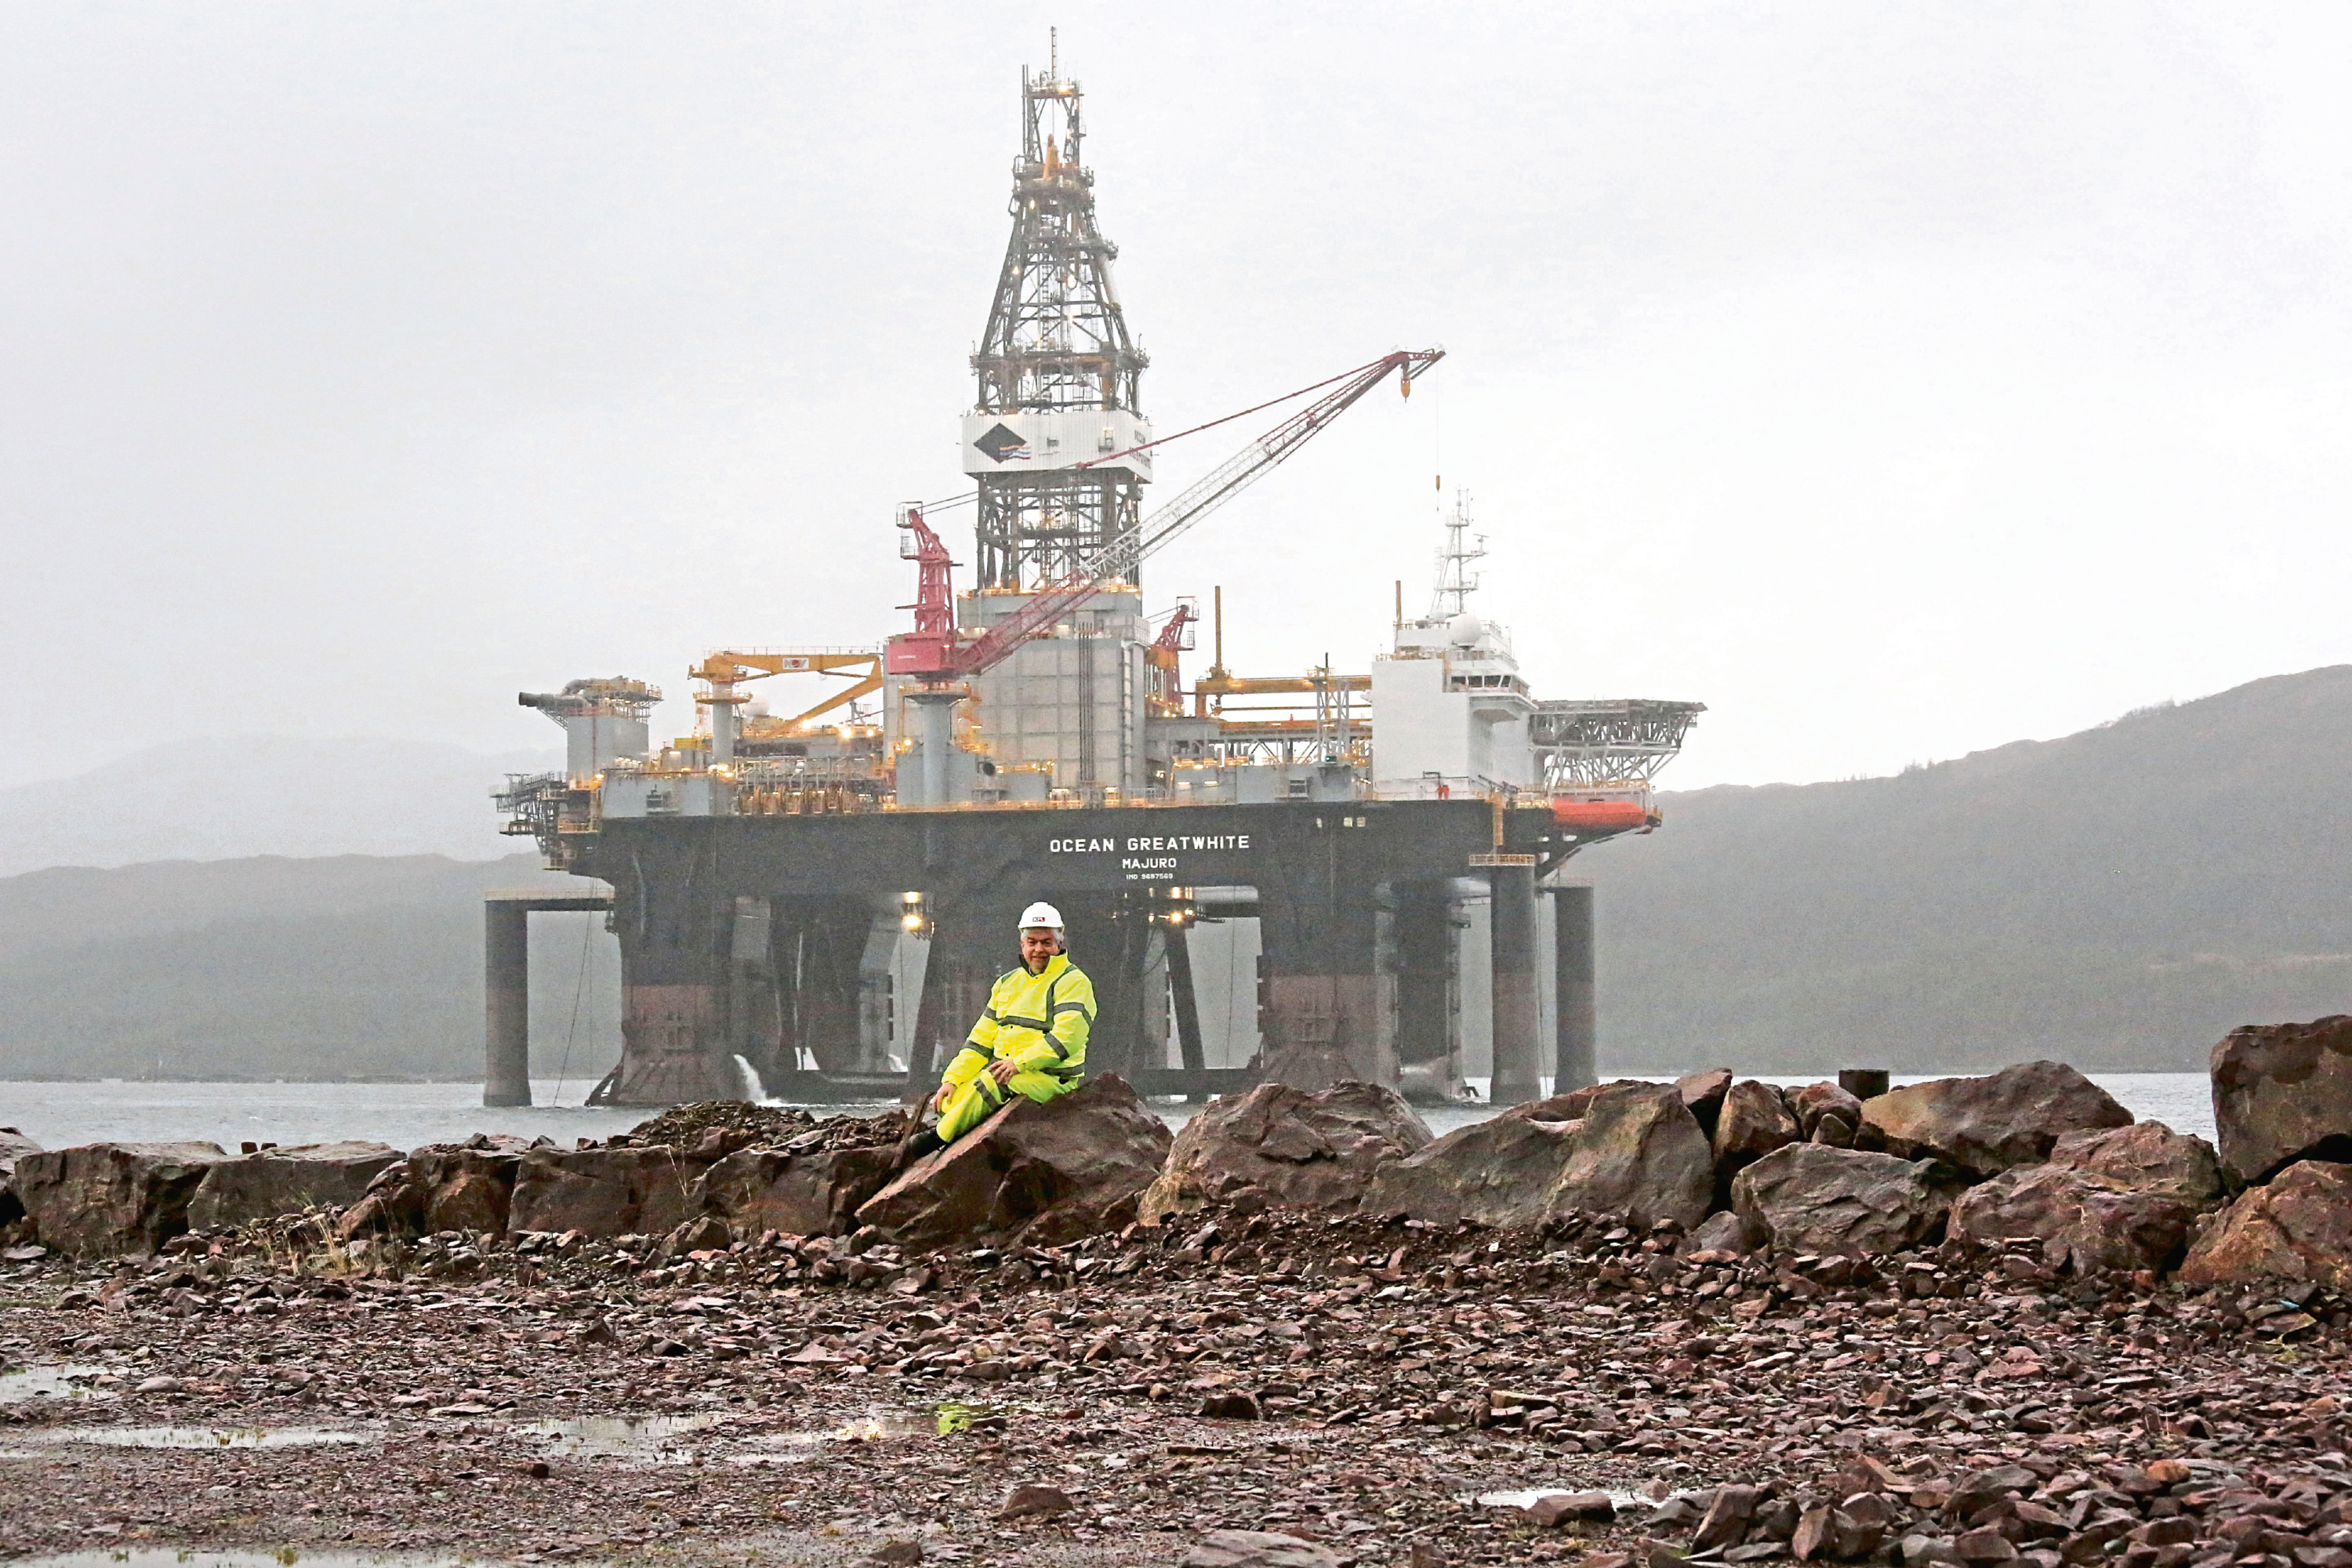 The Worlds Largest Semi Submersible Drilling Rig Arrives In The Highlands